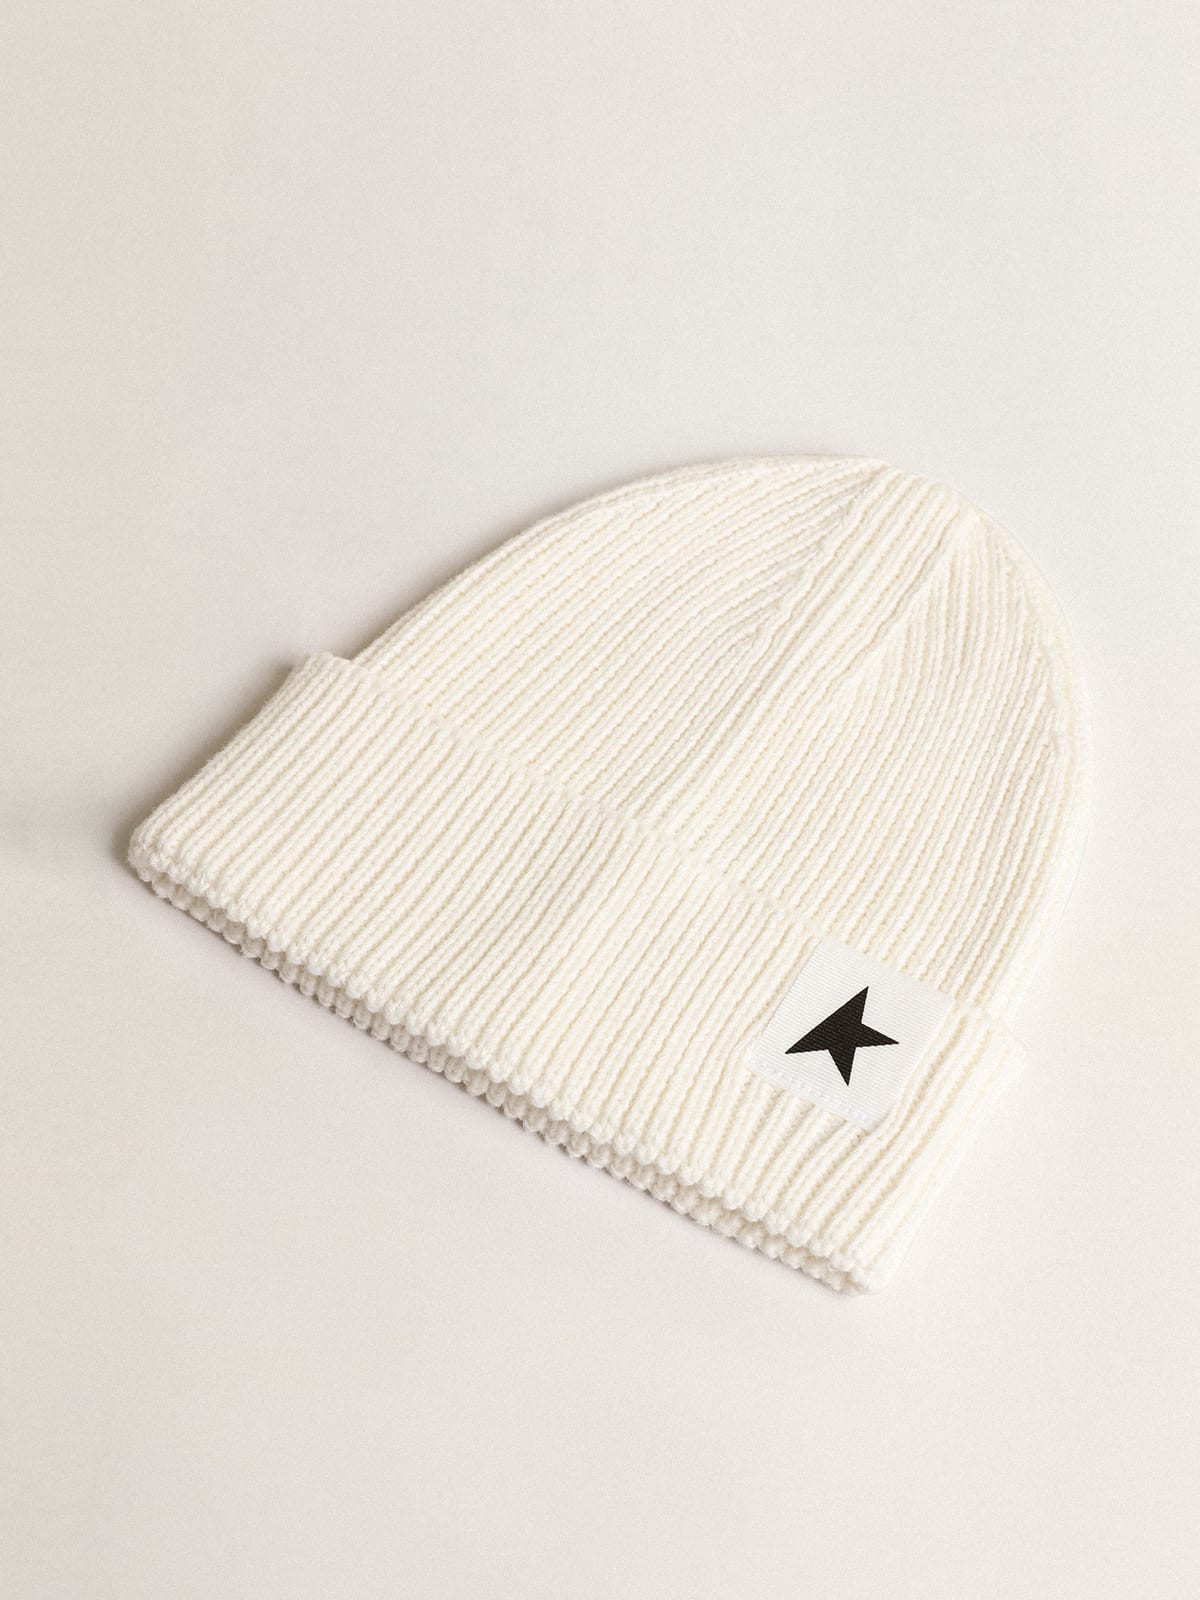 Golden Goose - Off-white cotton beanie with contrasting black star in 